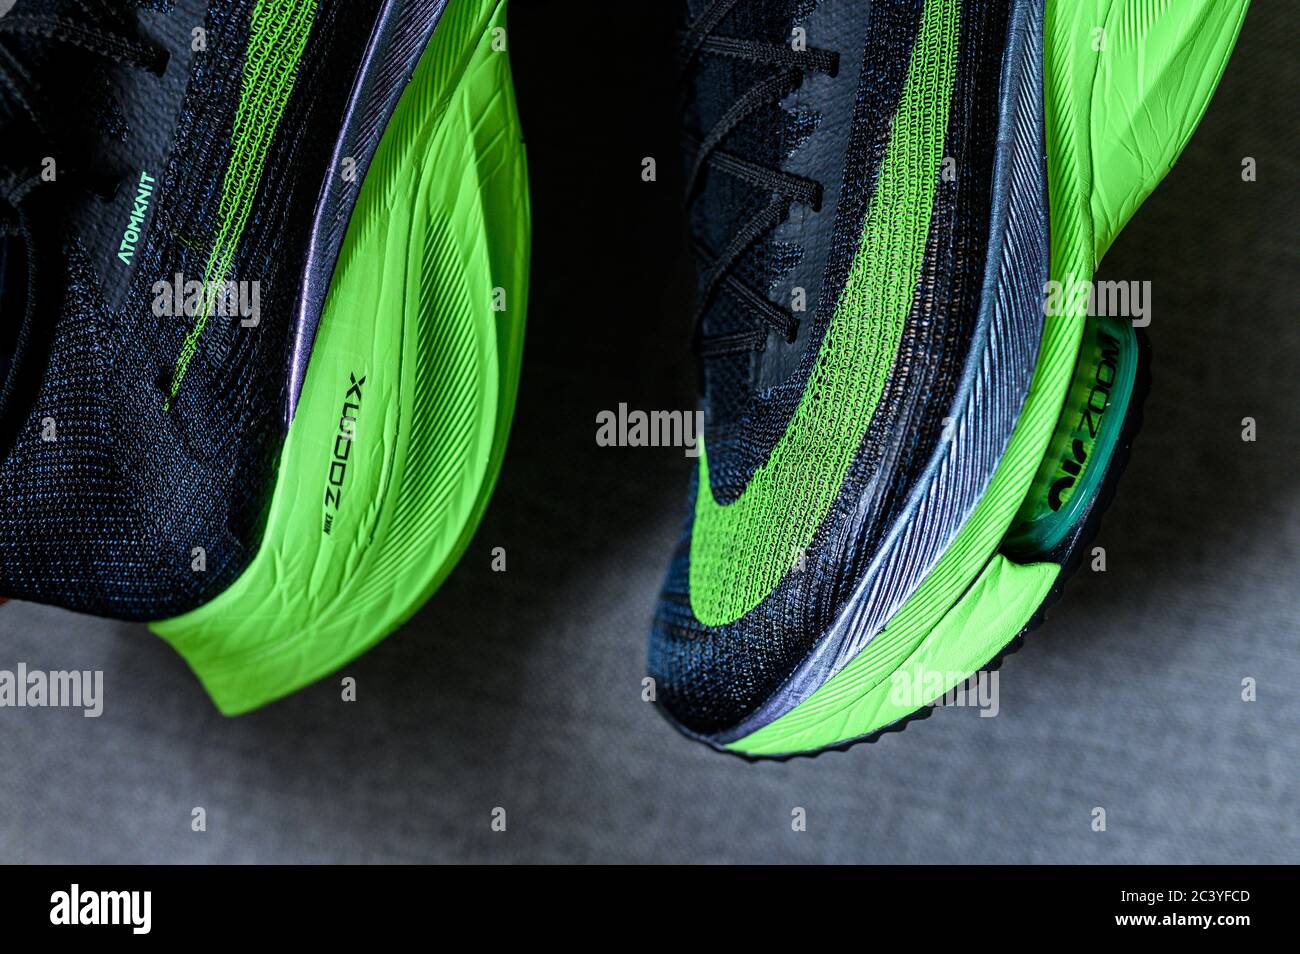 Page 10 - Nike Trainers High Resolution Stock Photography and Images - Alamy